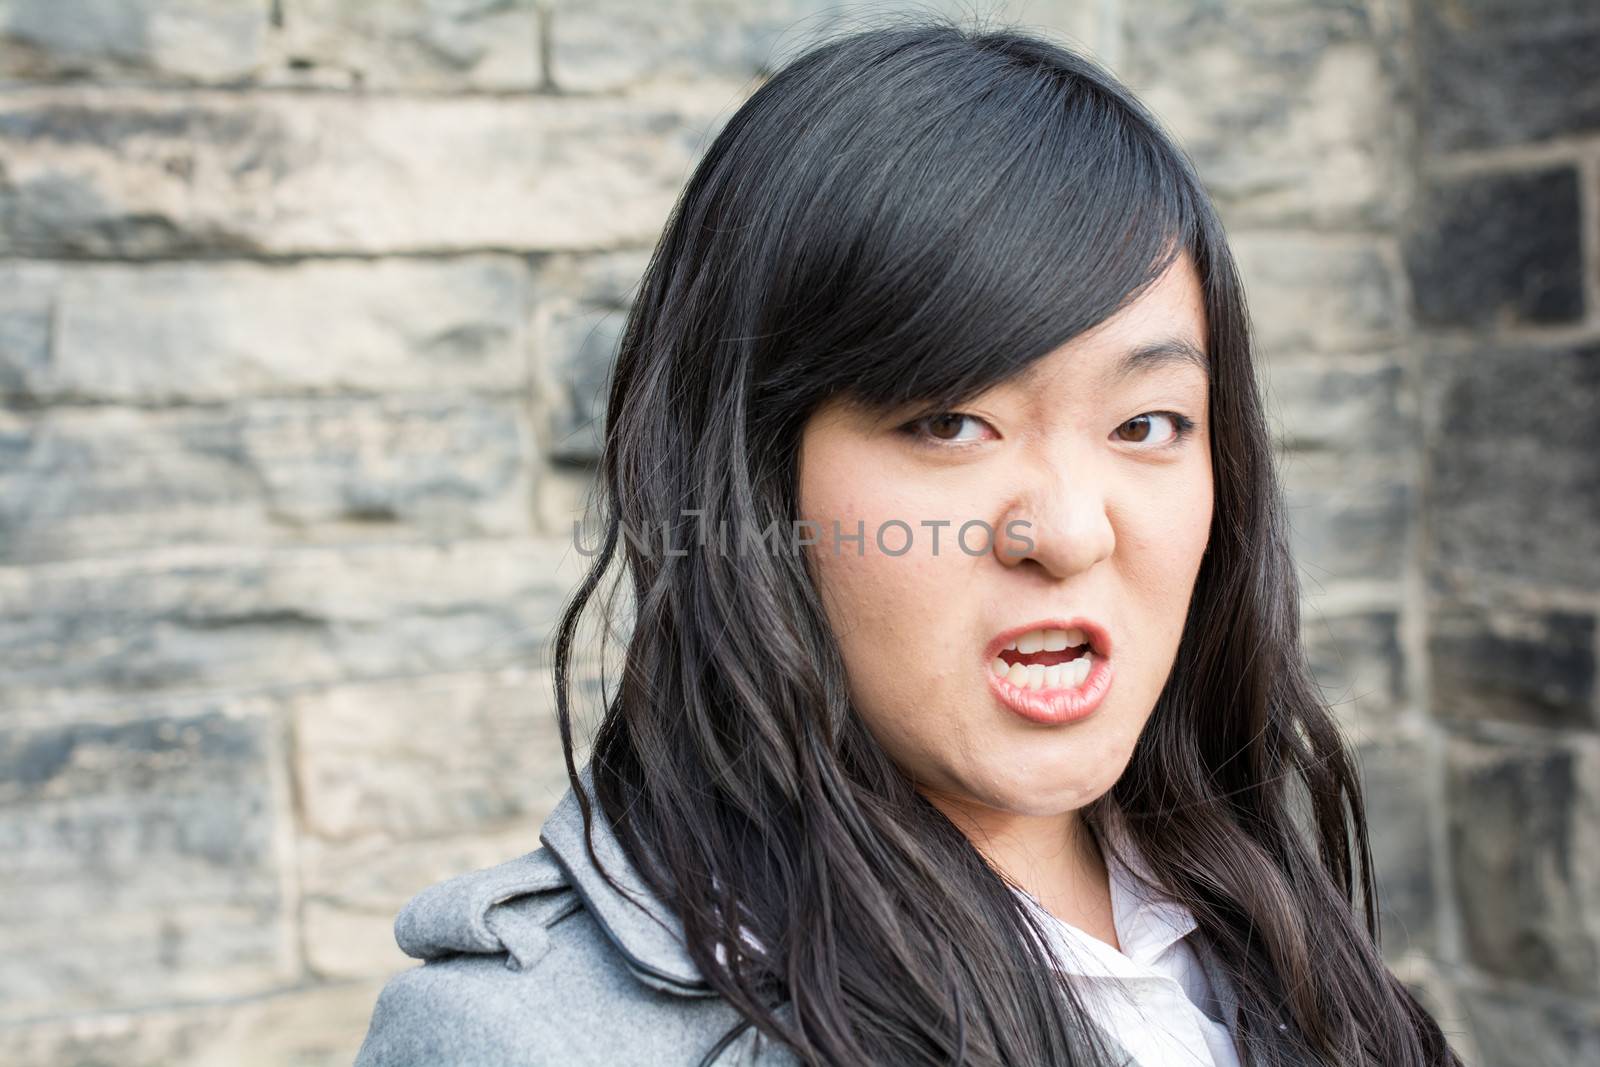 Portrait of young woman in front of a stone wall looking angry